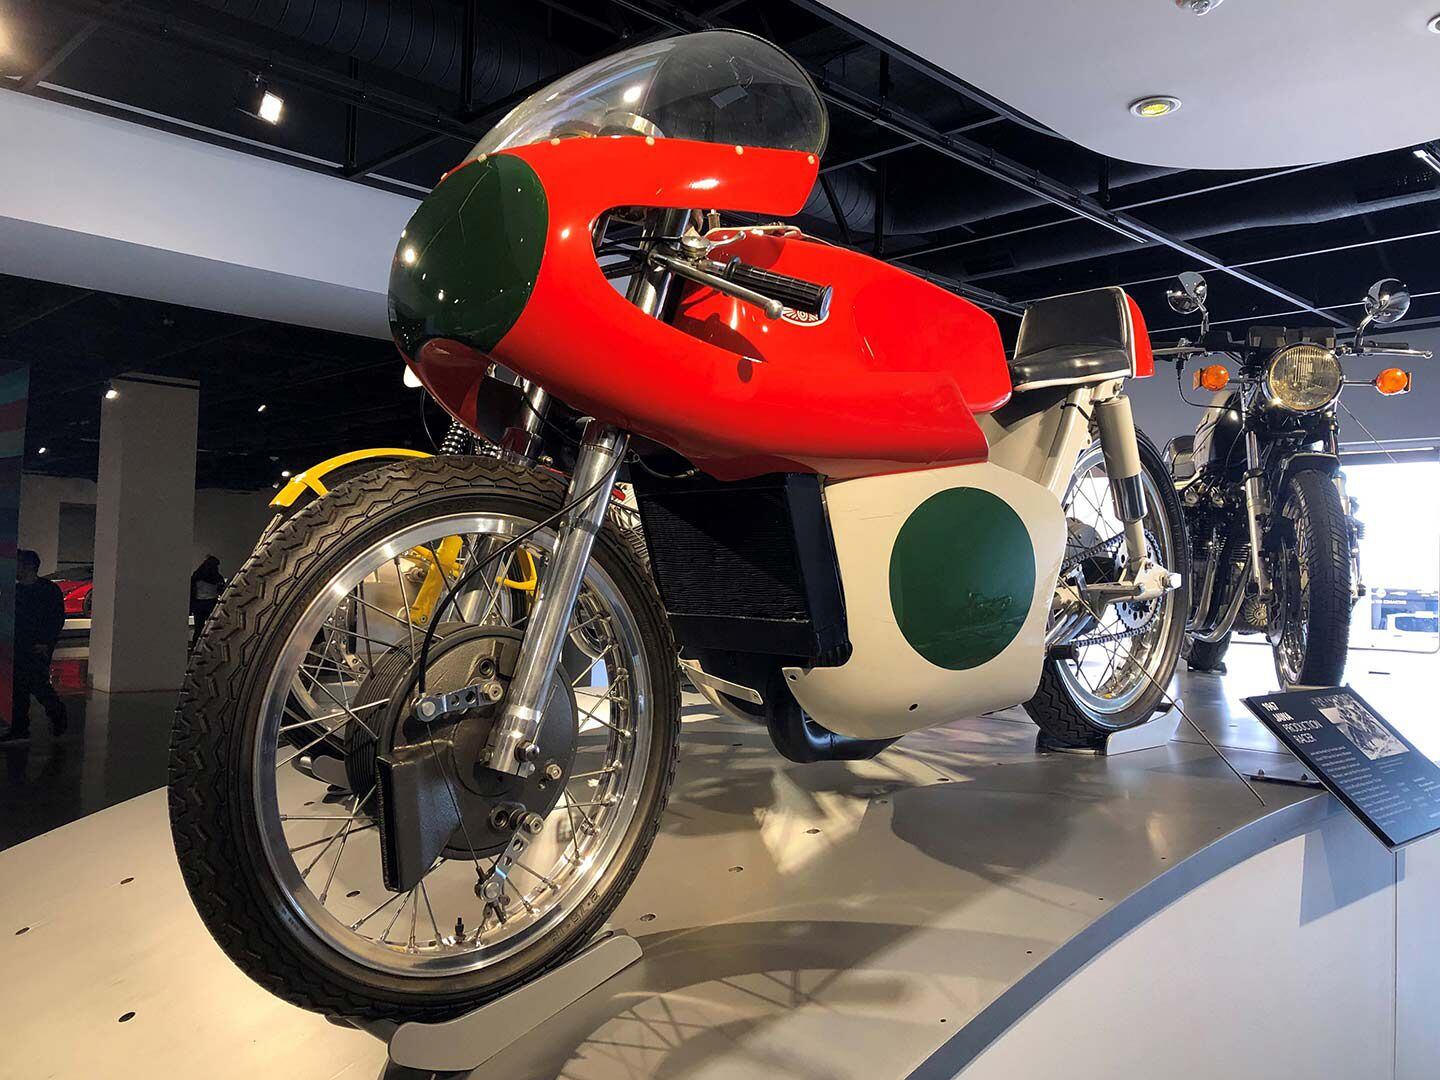 This 1967 Jawa 250 production racer was known as the “Flying Banana” due to the unusually curved frame.